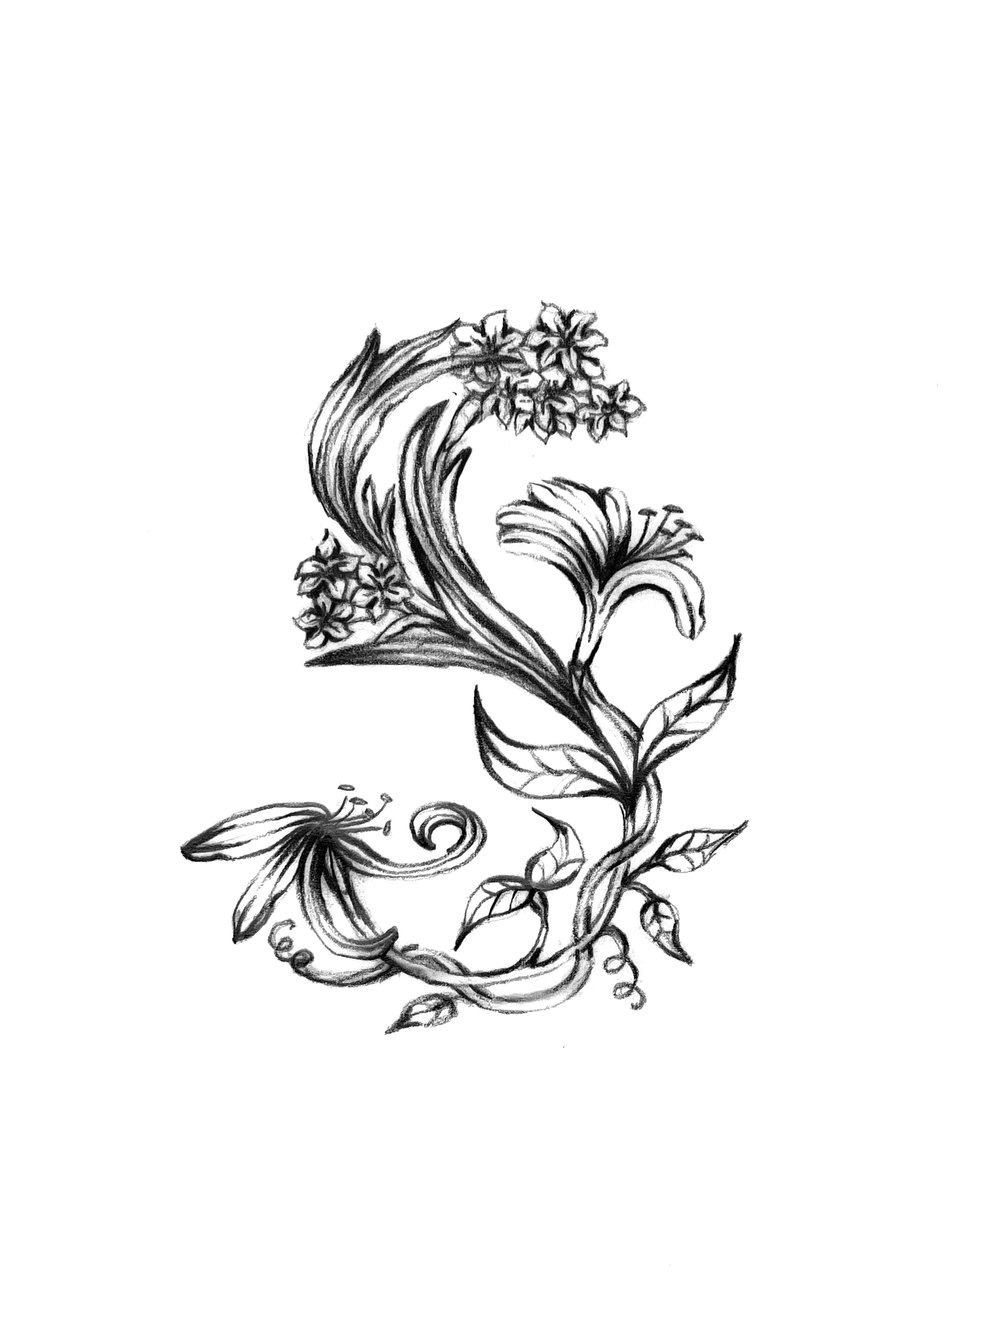 Swoon Floral Design logo sketch by Creme